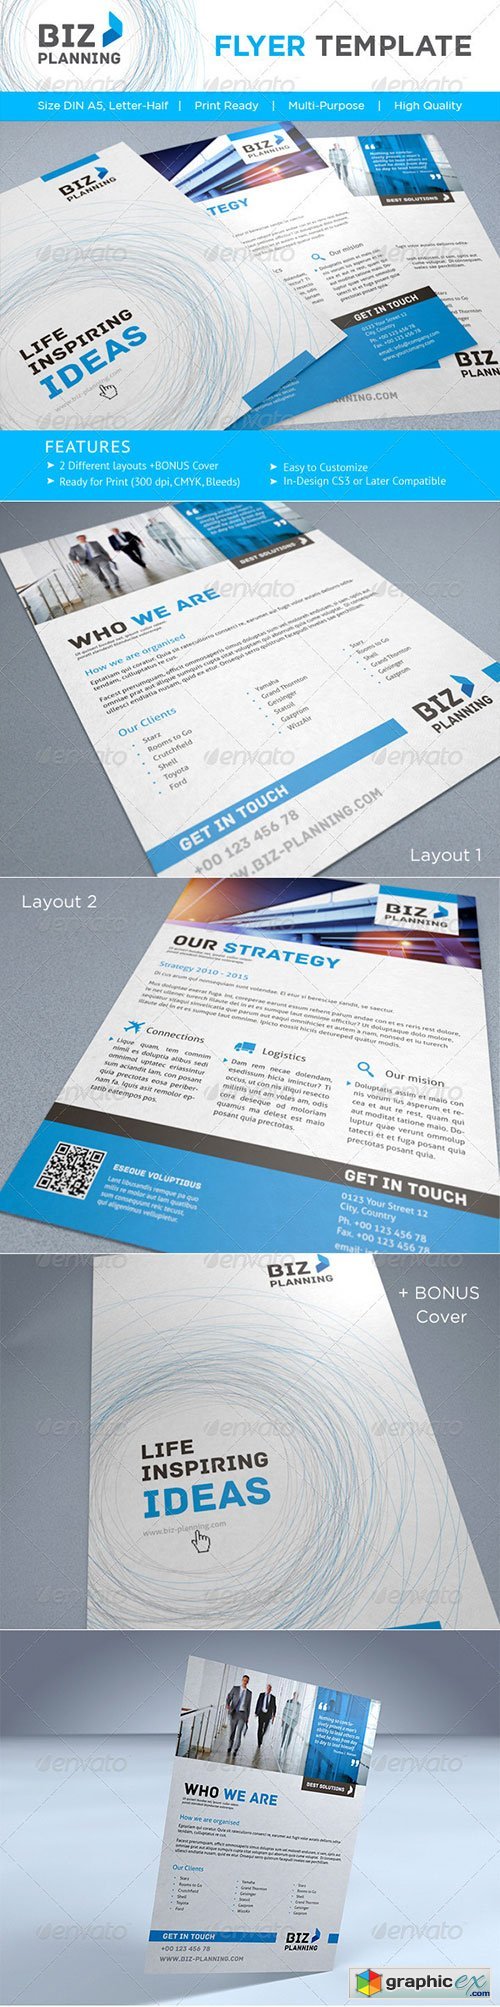 Corporate Flyer / AD Template 2235603